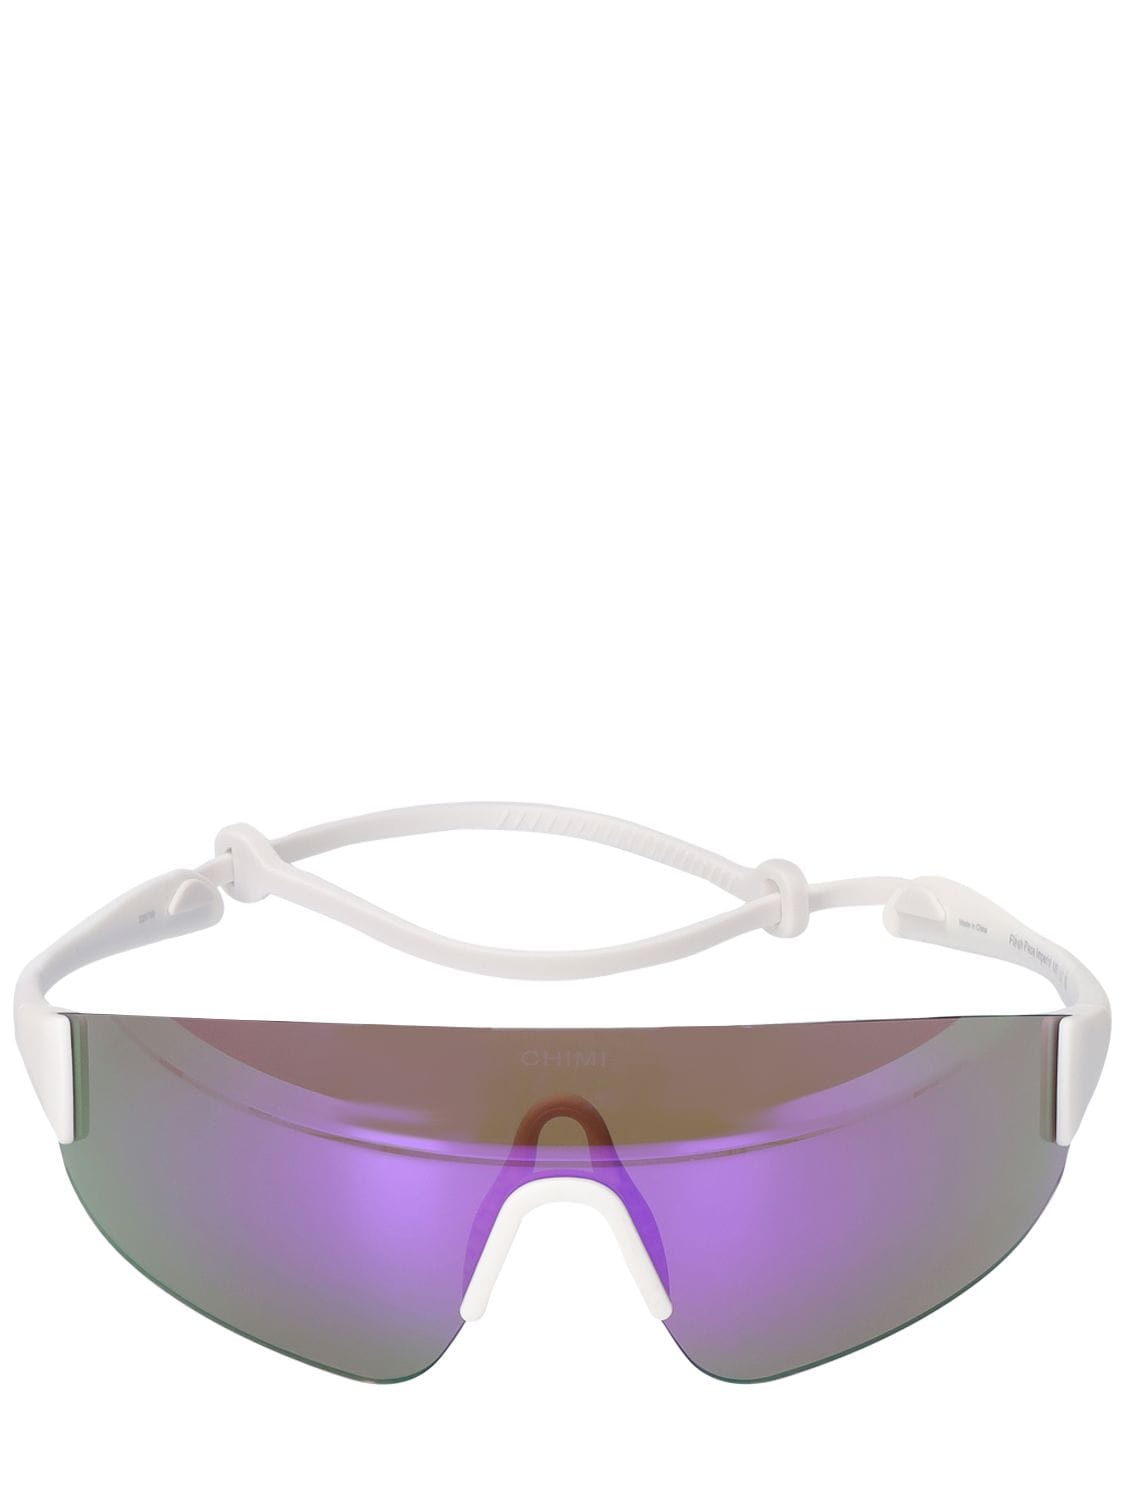 Chimi Pace Imperial Mask Sunglasses In White,purple